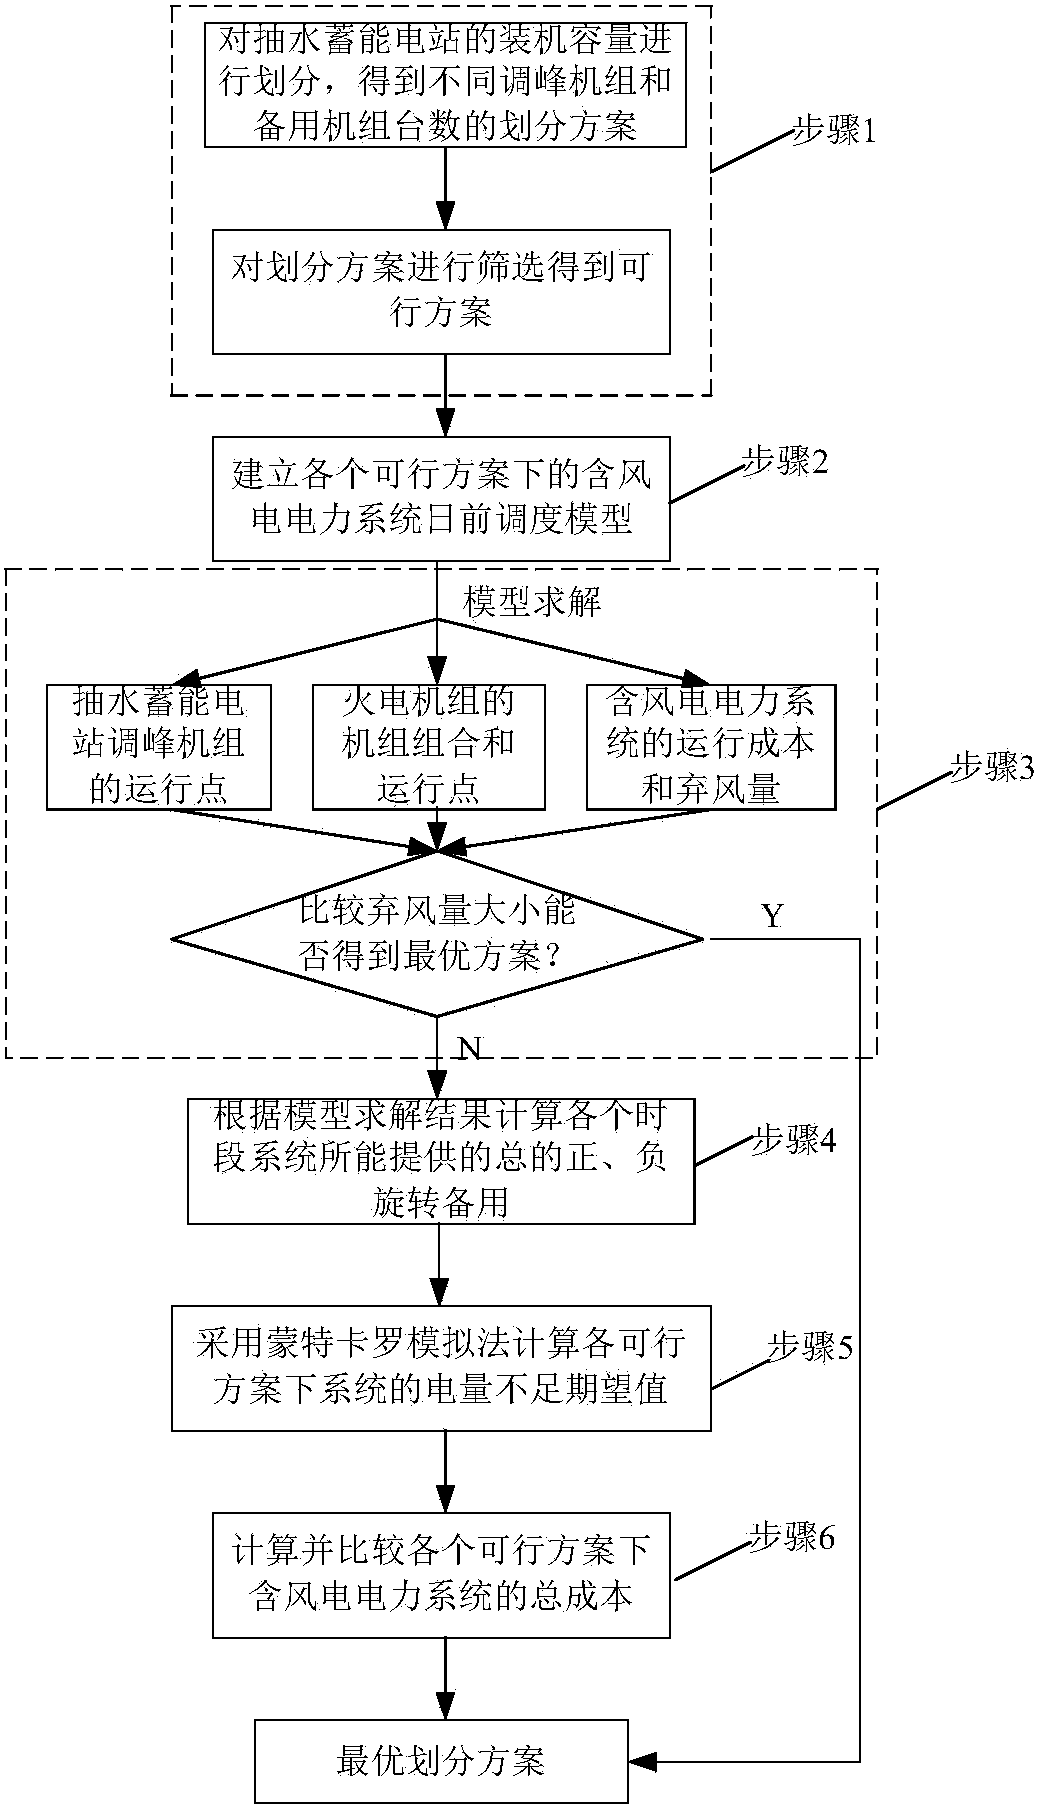 Scheduling method for pumped storage power station to participate in electric power system with wind power